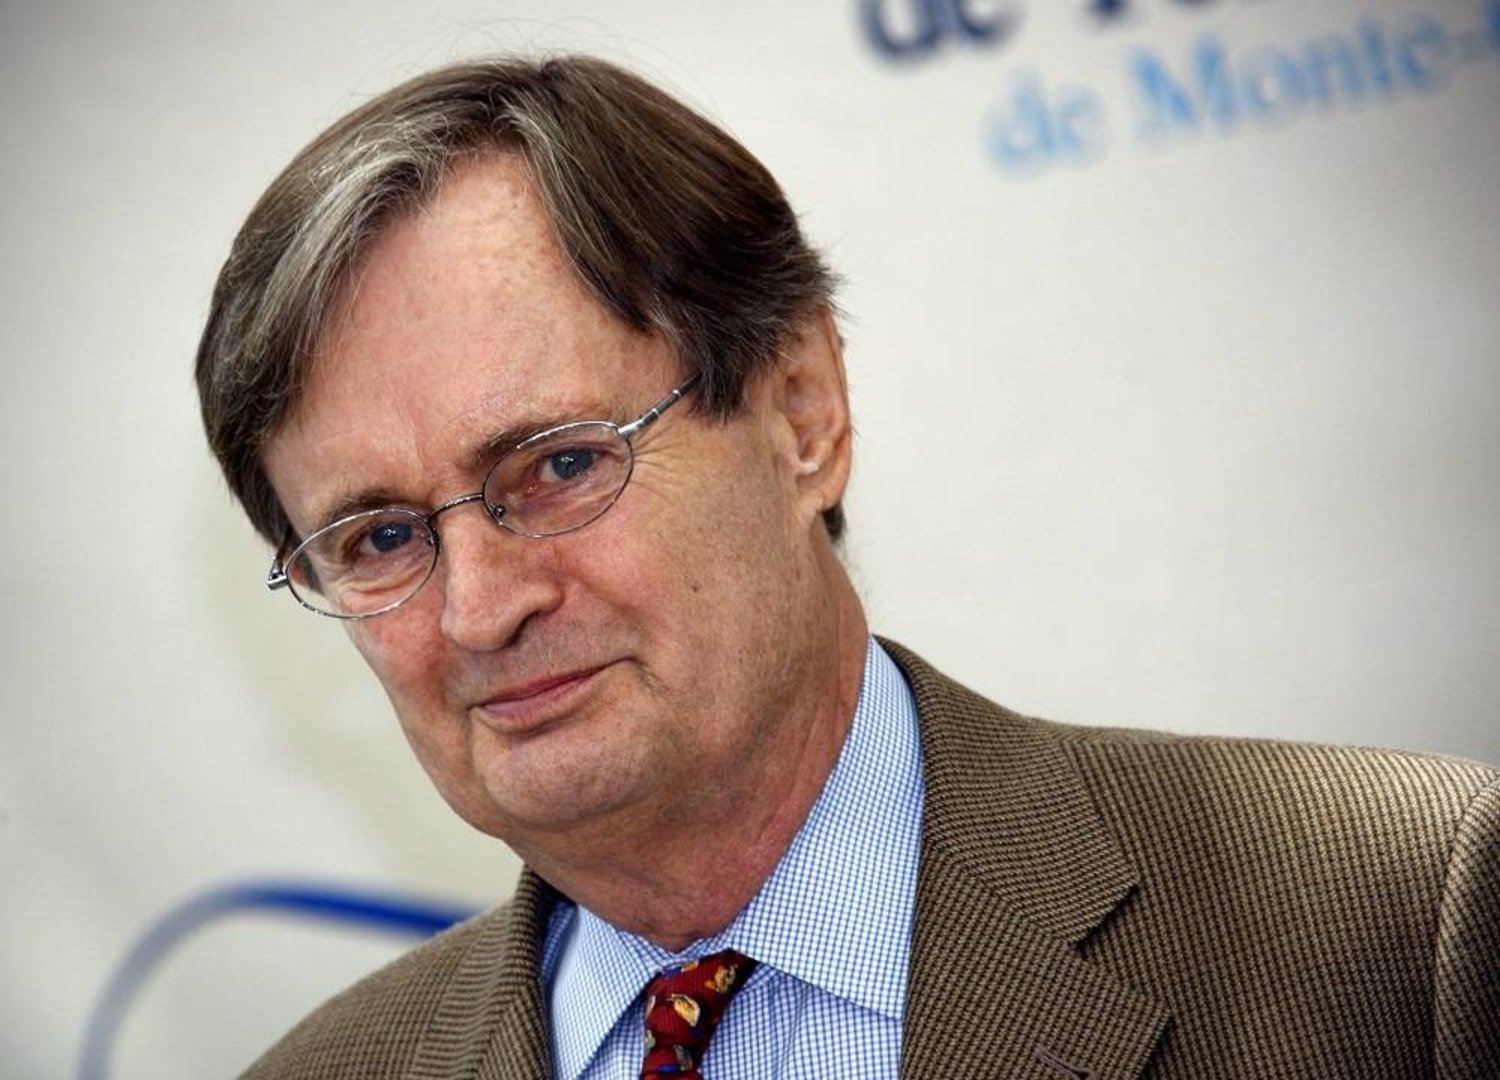 US actor David Mccallum poses, on June 10, 2009 during a photocall presenting the TV serie "Navy NCIS : Naval Criminal Investigative Service" at the 49th Monte Carlo Television Festival in Monaco. (AFP)